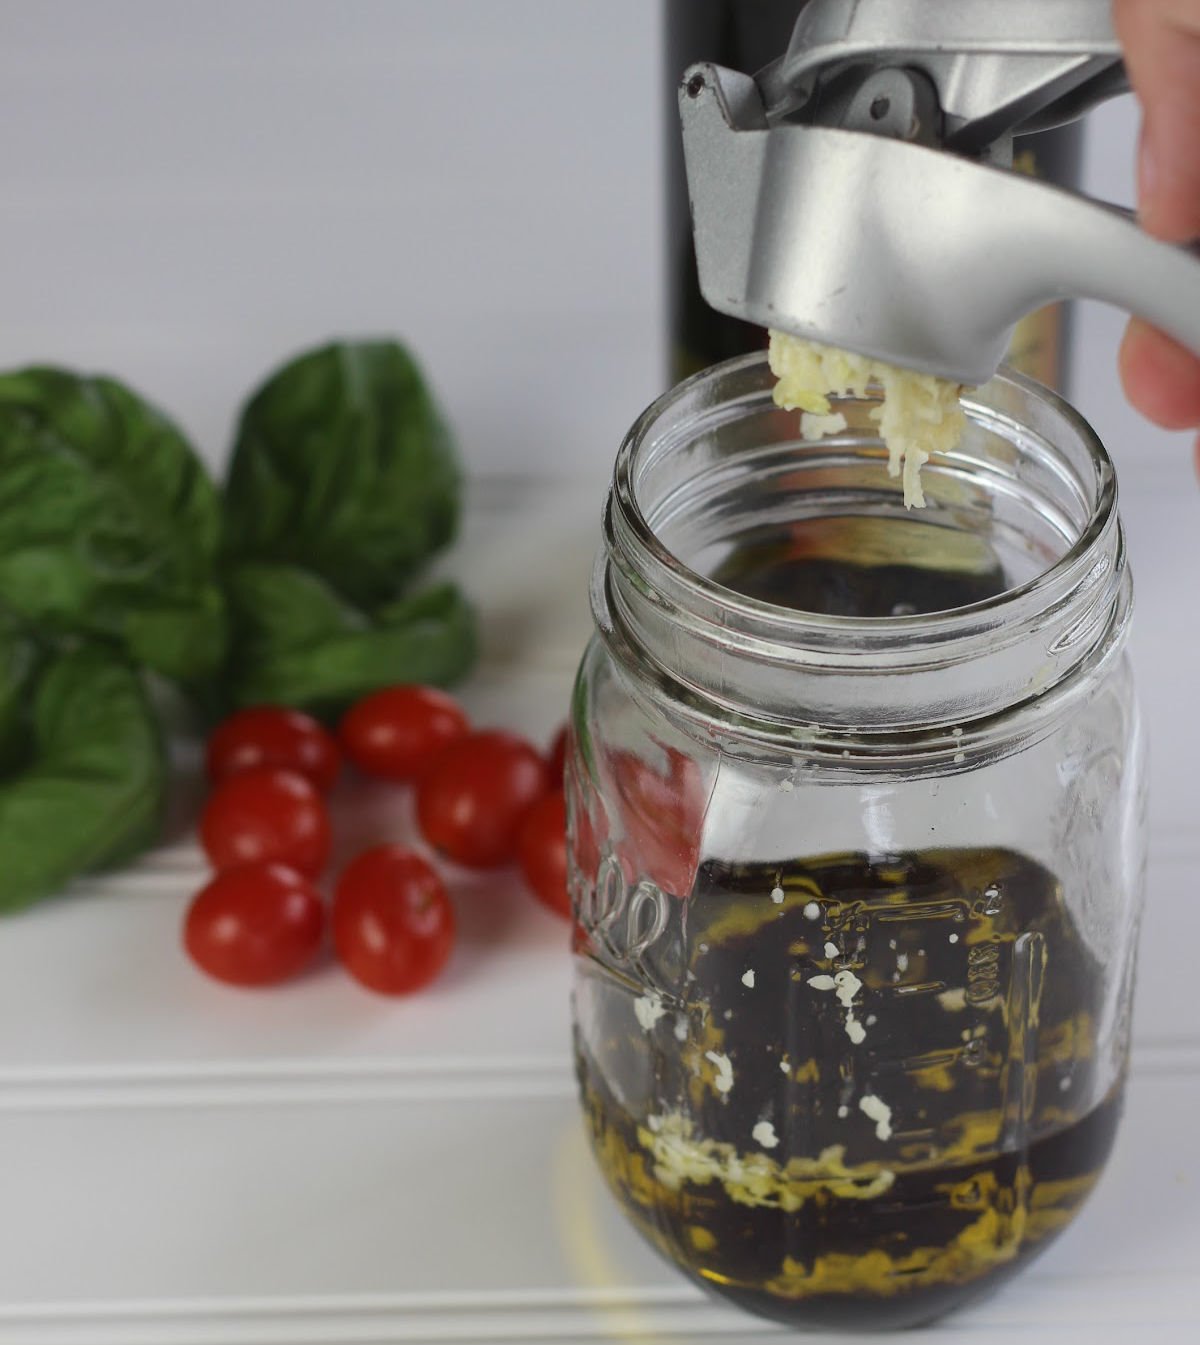 garlic being pressed into a jar with oil and balsamic vinegar to make balsamic vinaigrette dressing.  Tomatoes and fresh basil leaves are in the background.